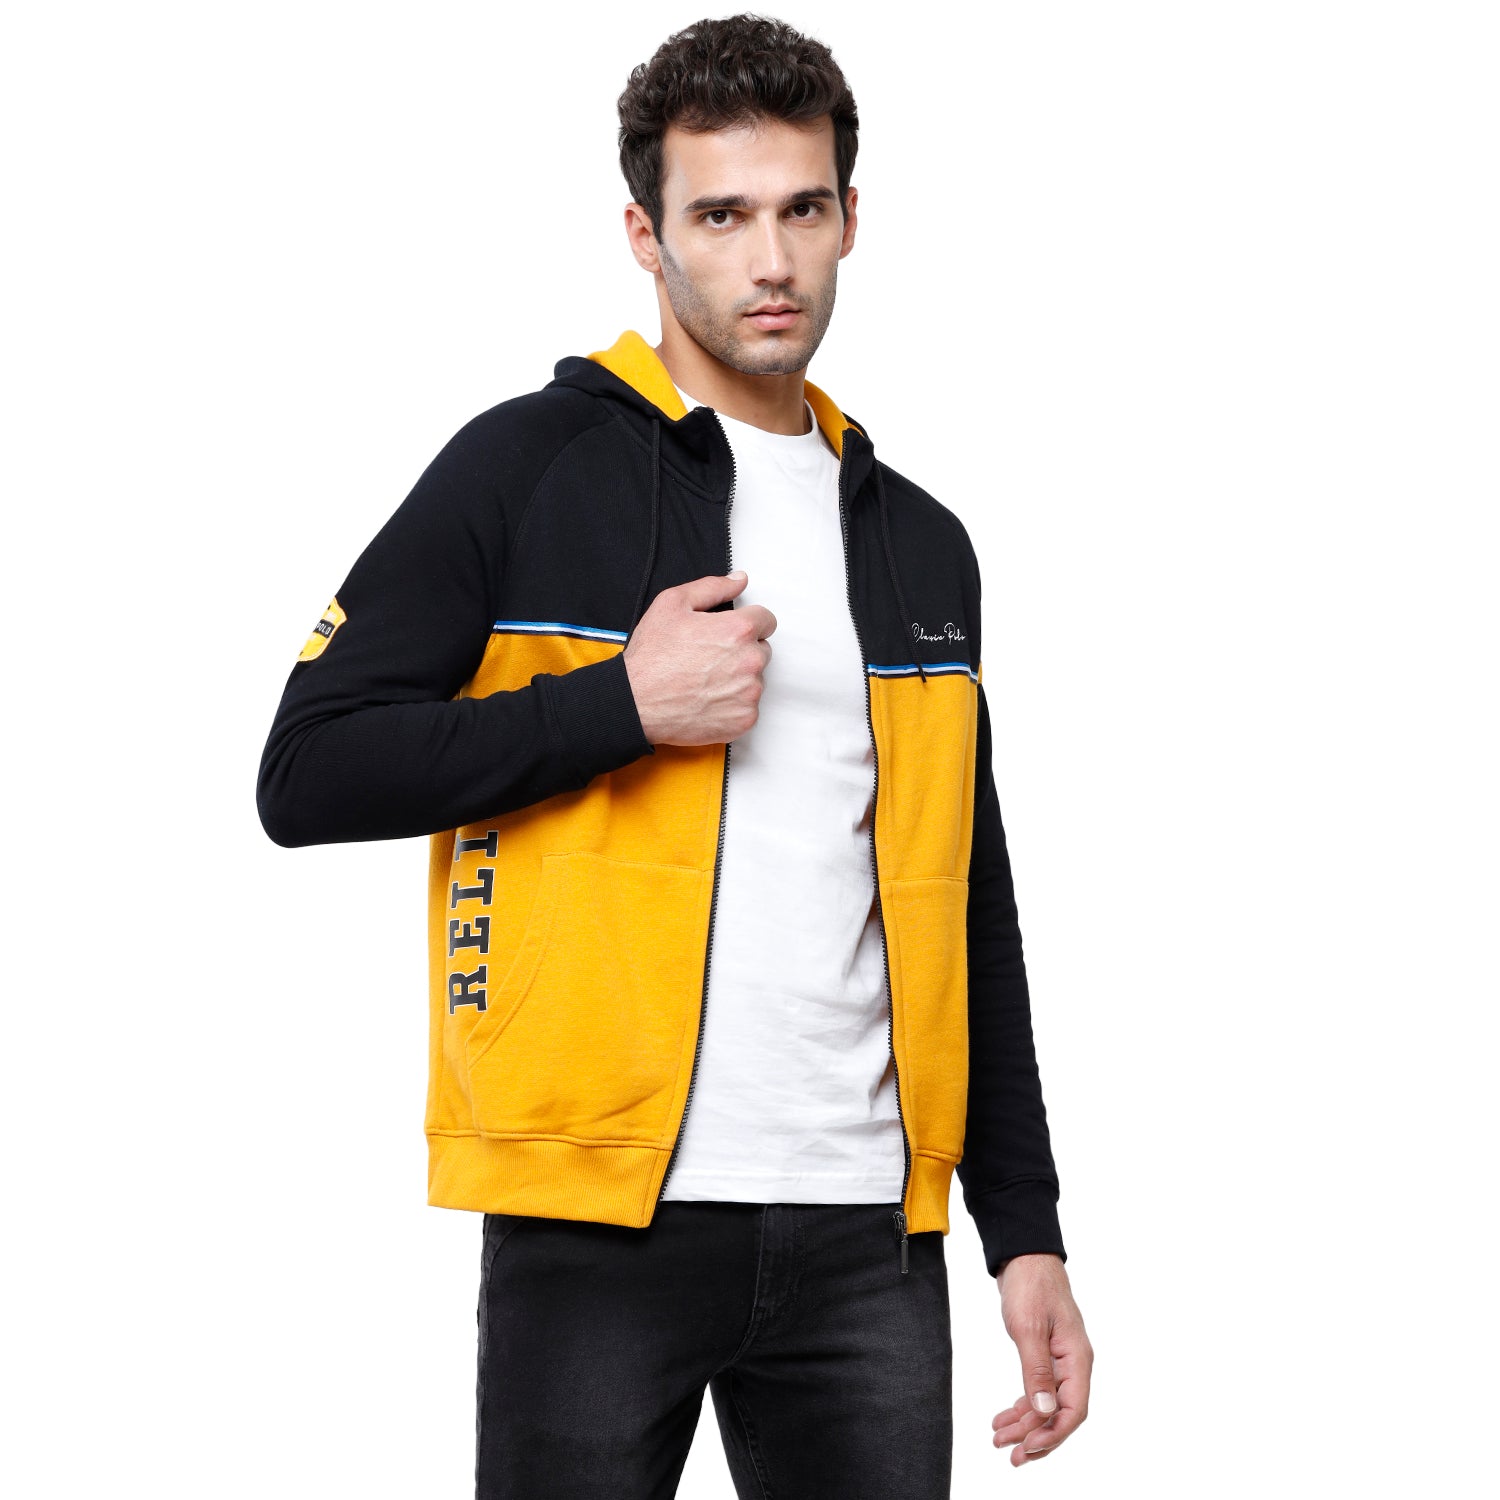 Classic Polo Men's Color Block Full Sleeve Yellow & Black Hood Sweat Shirt - CPSS-330A Sweat Shirts Classic Polo 